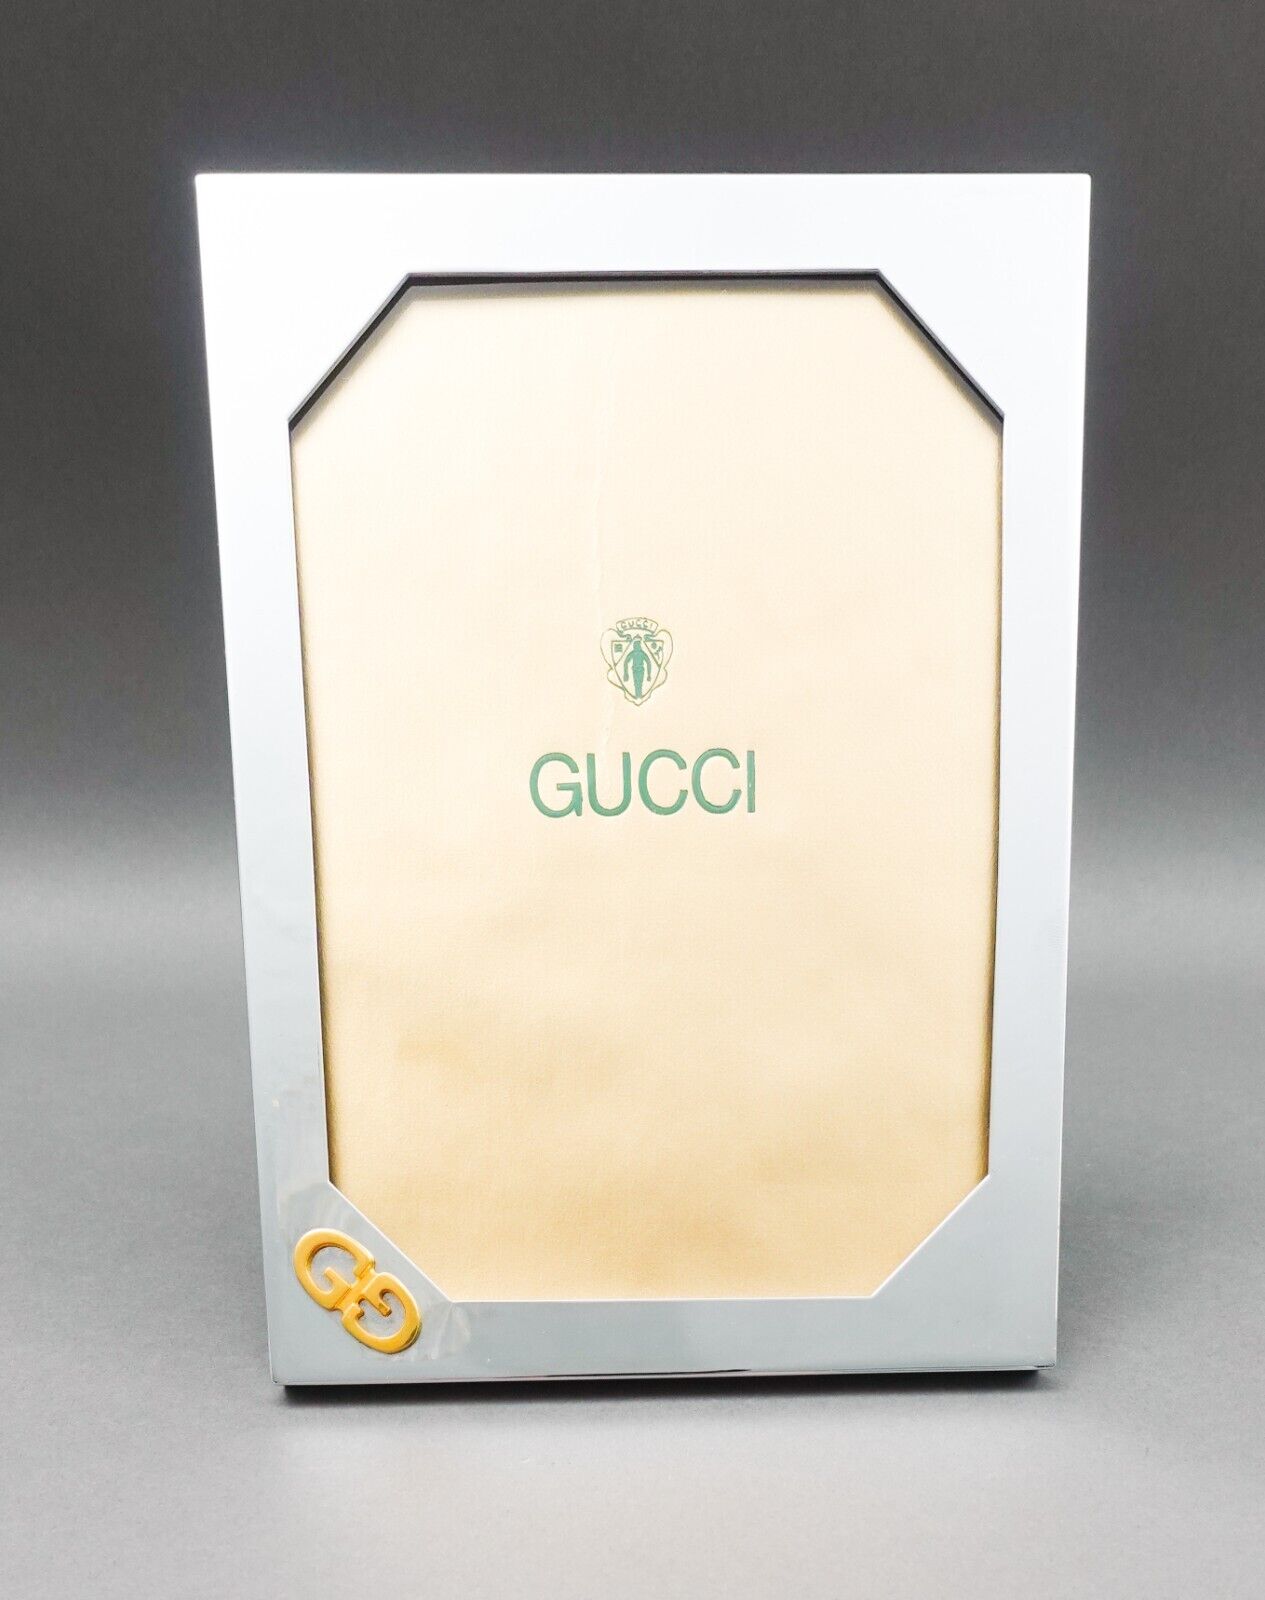 Gucci Italy Vintage Chrome Silver/Gold Tone GG Logo Picture Photo Frame 5x7 Read